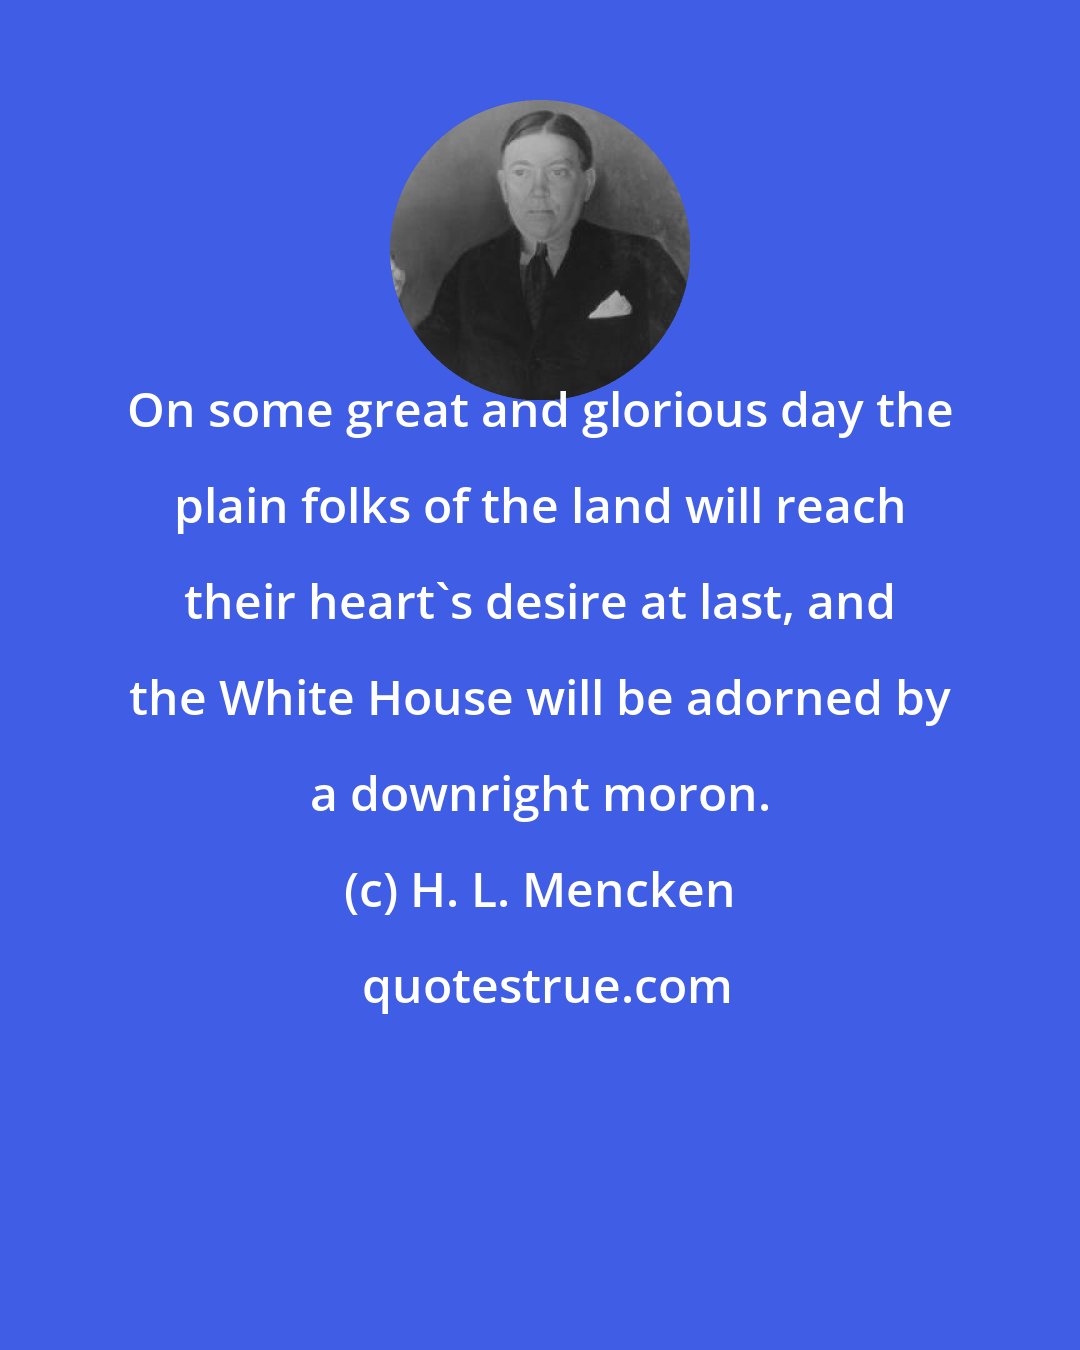 H. L. Mencken: On some great and glorious day the plain folks of the land will reach their heart's desire at last, and the White House will be adorned by a downright moron.